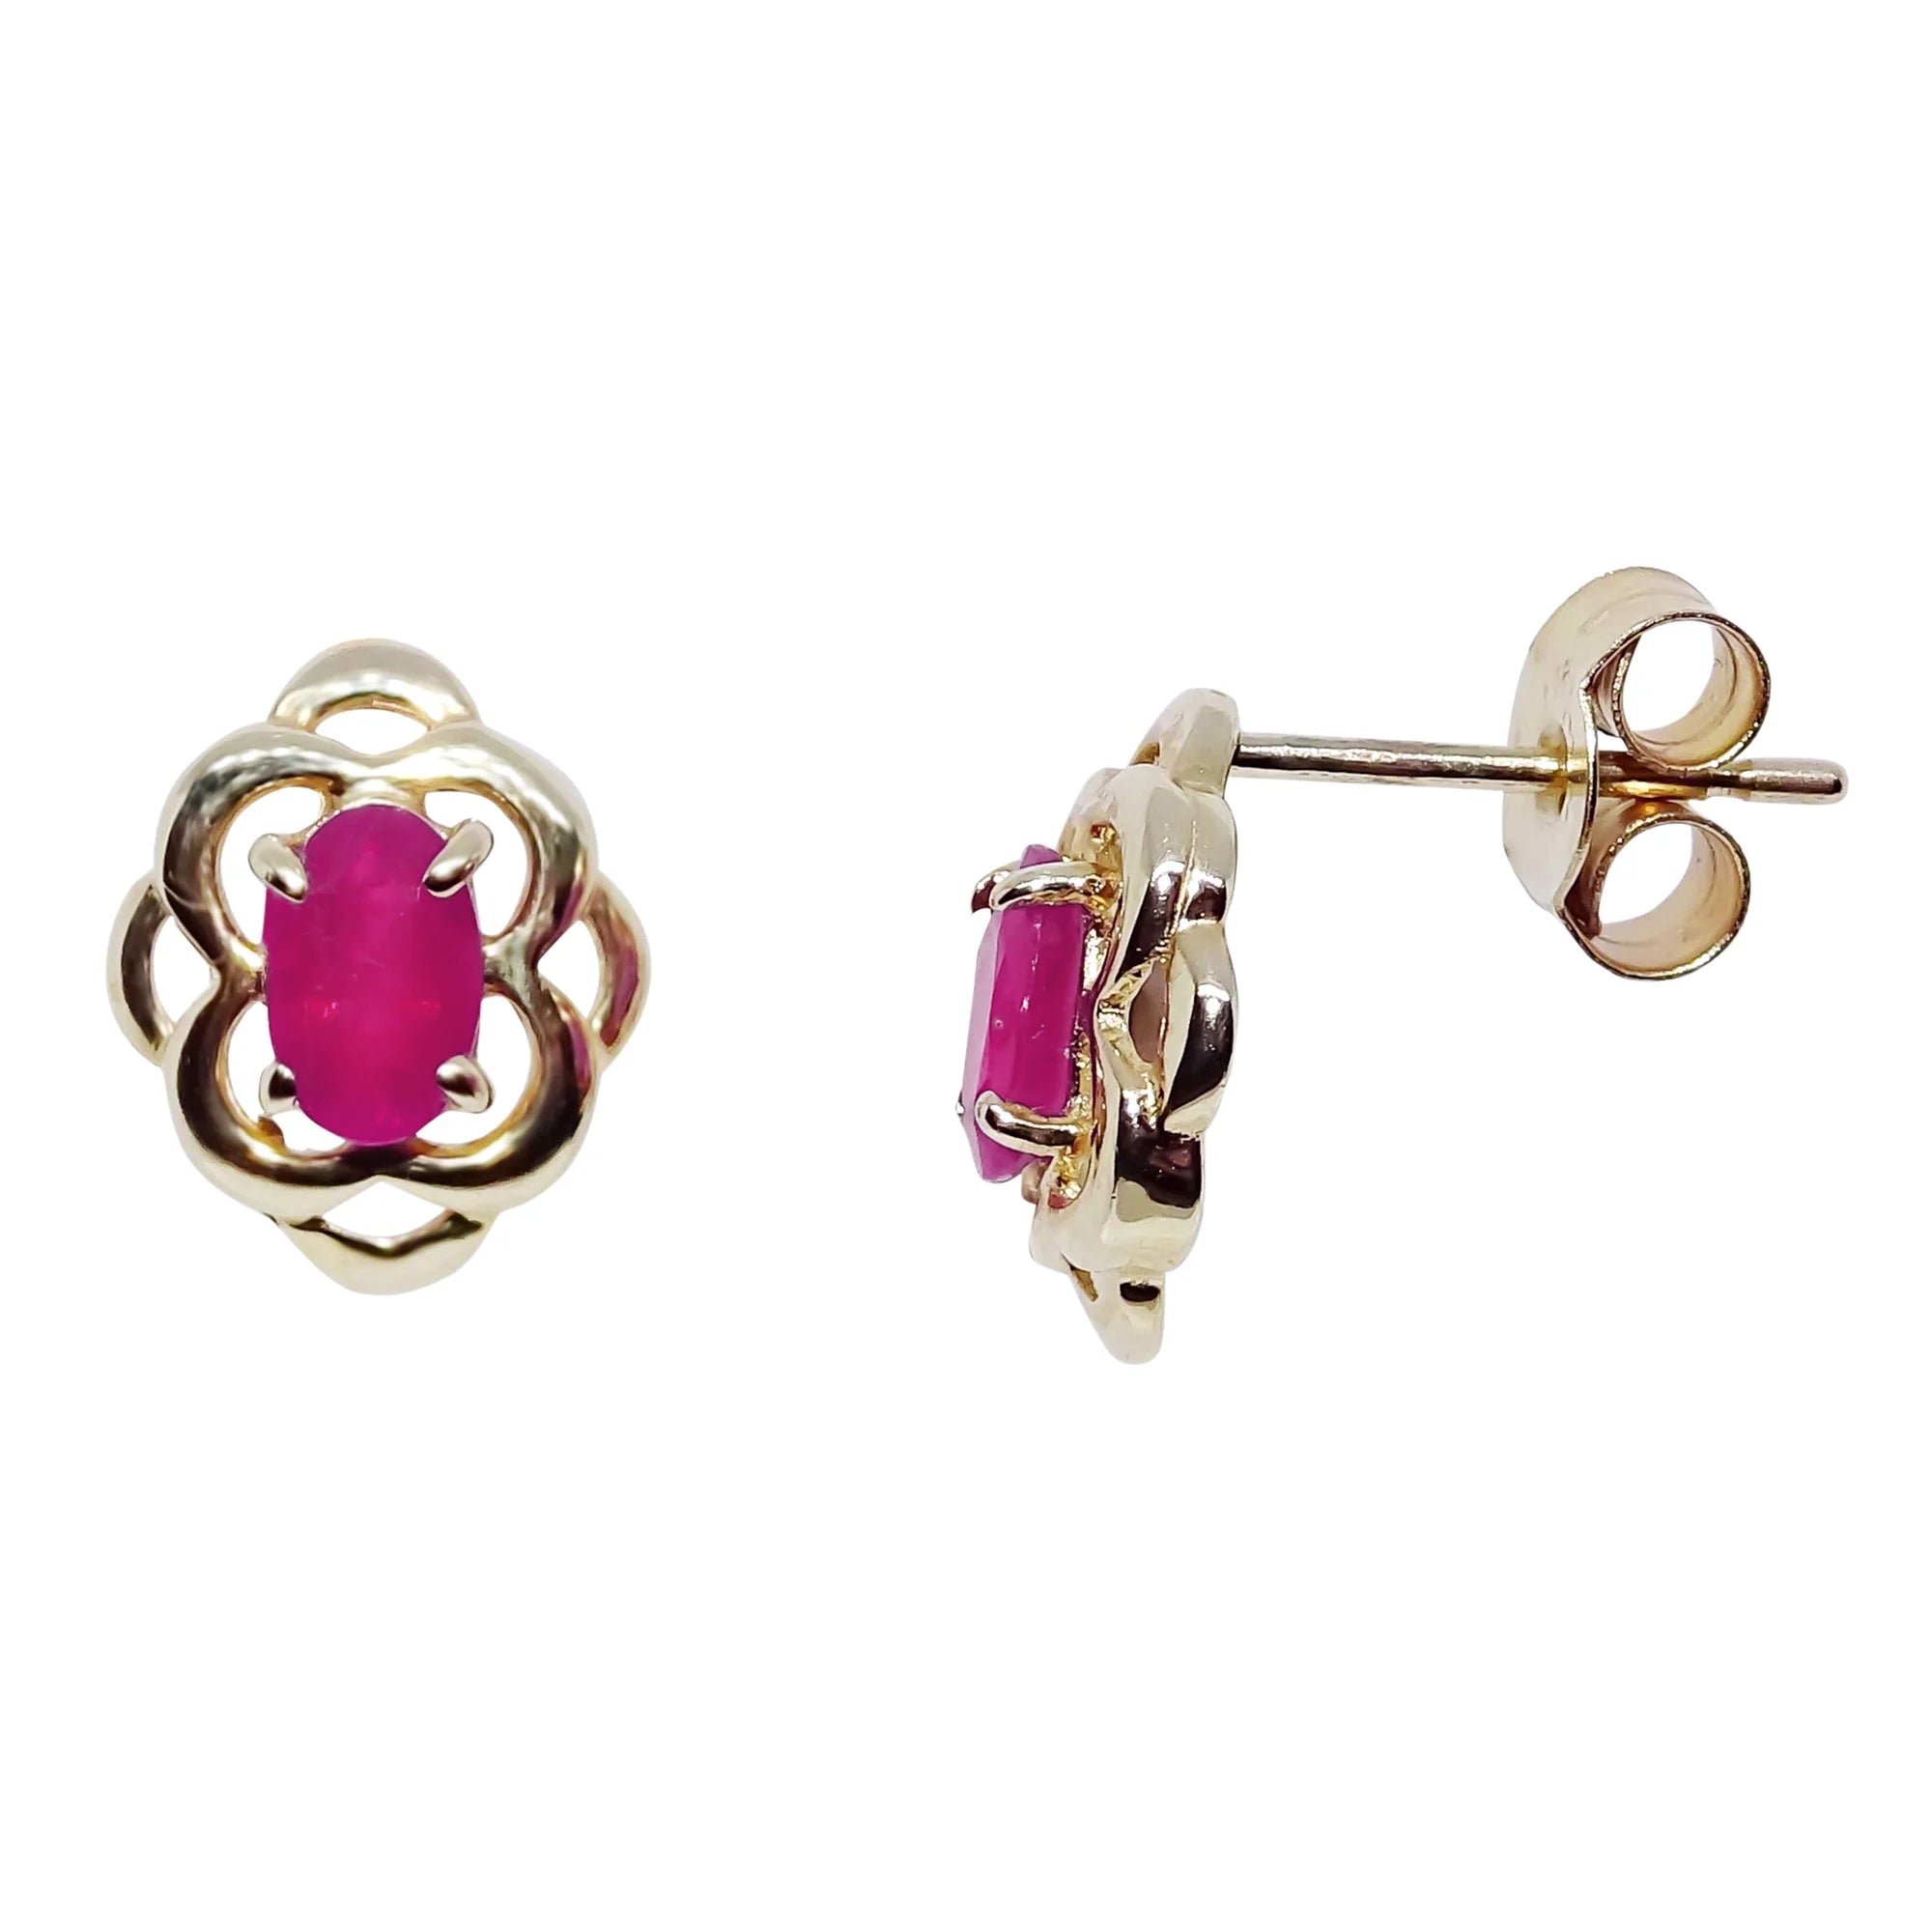 9ct gold celtic style 5x3mm oval ruby stud earrings